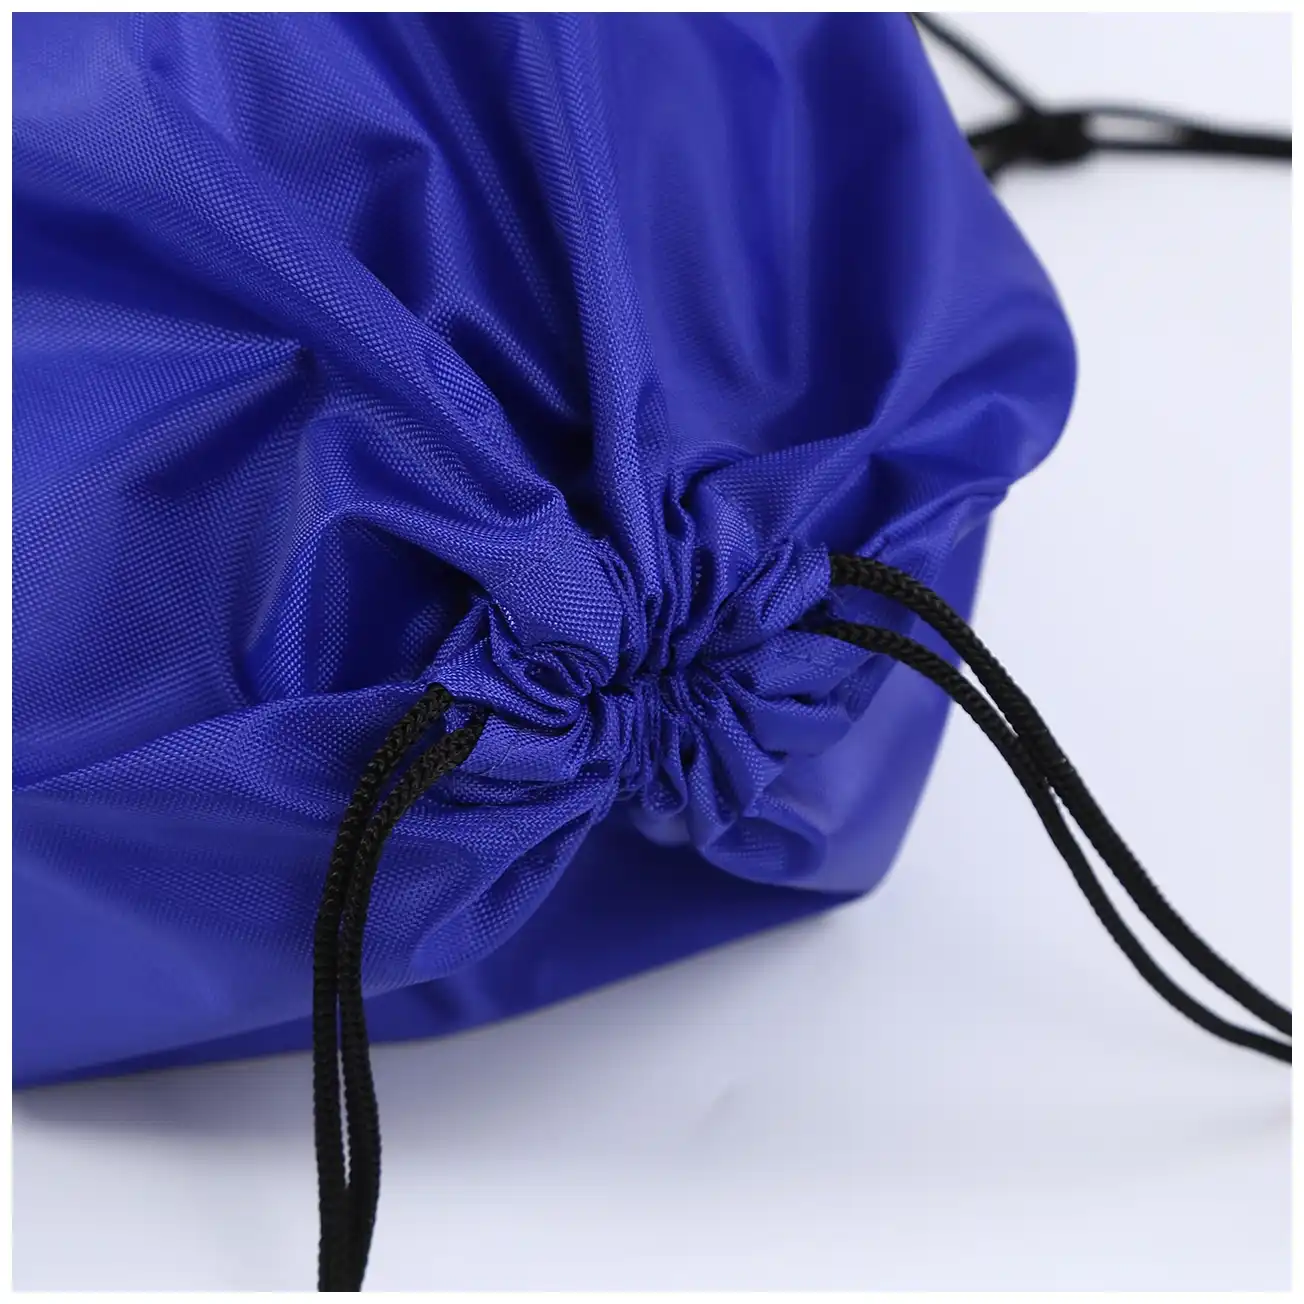 Custom Promotional Drawstring Bags: Carrying Your Brand to New Heights